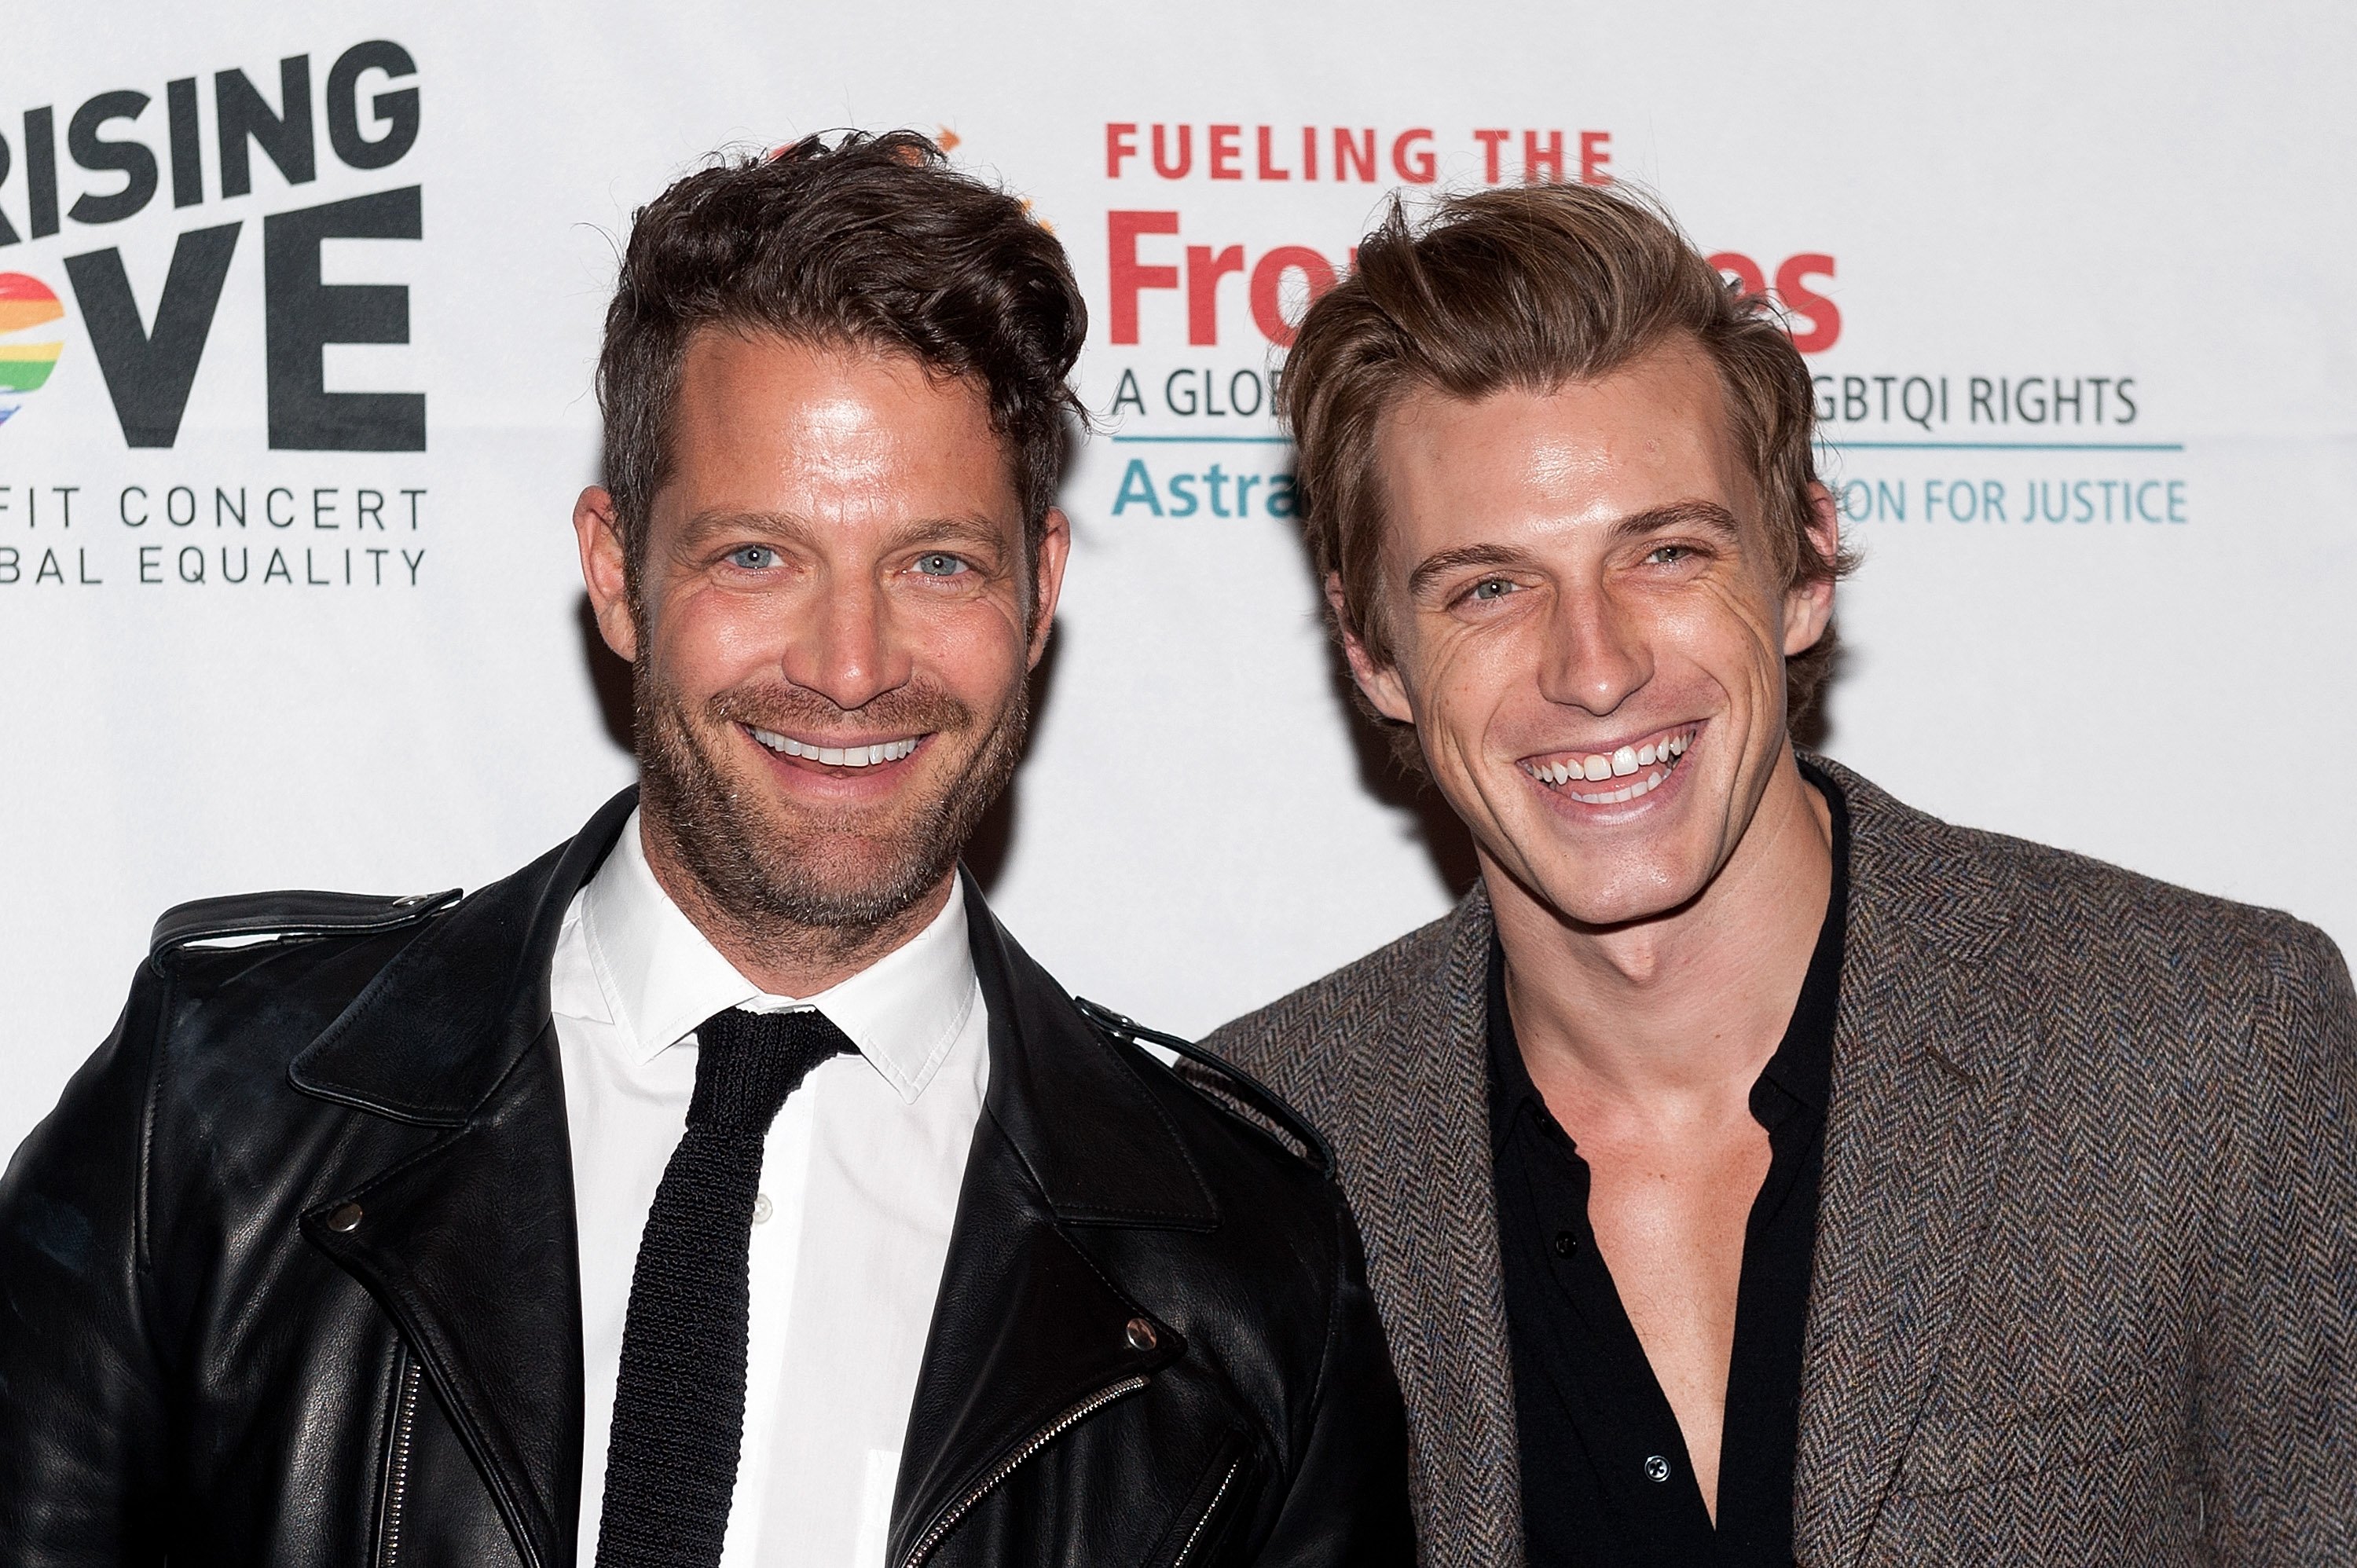 Nate Berkus and Jeremiah Brent on September 15, 2014, in New York City. | Source: Getty Images